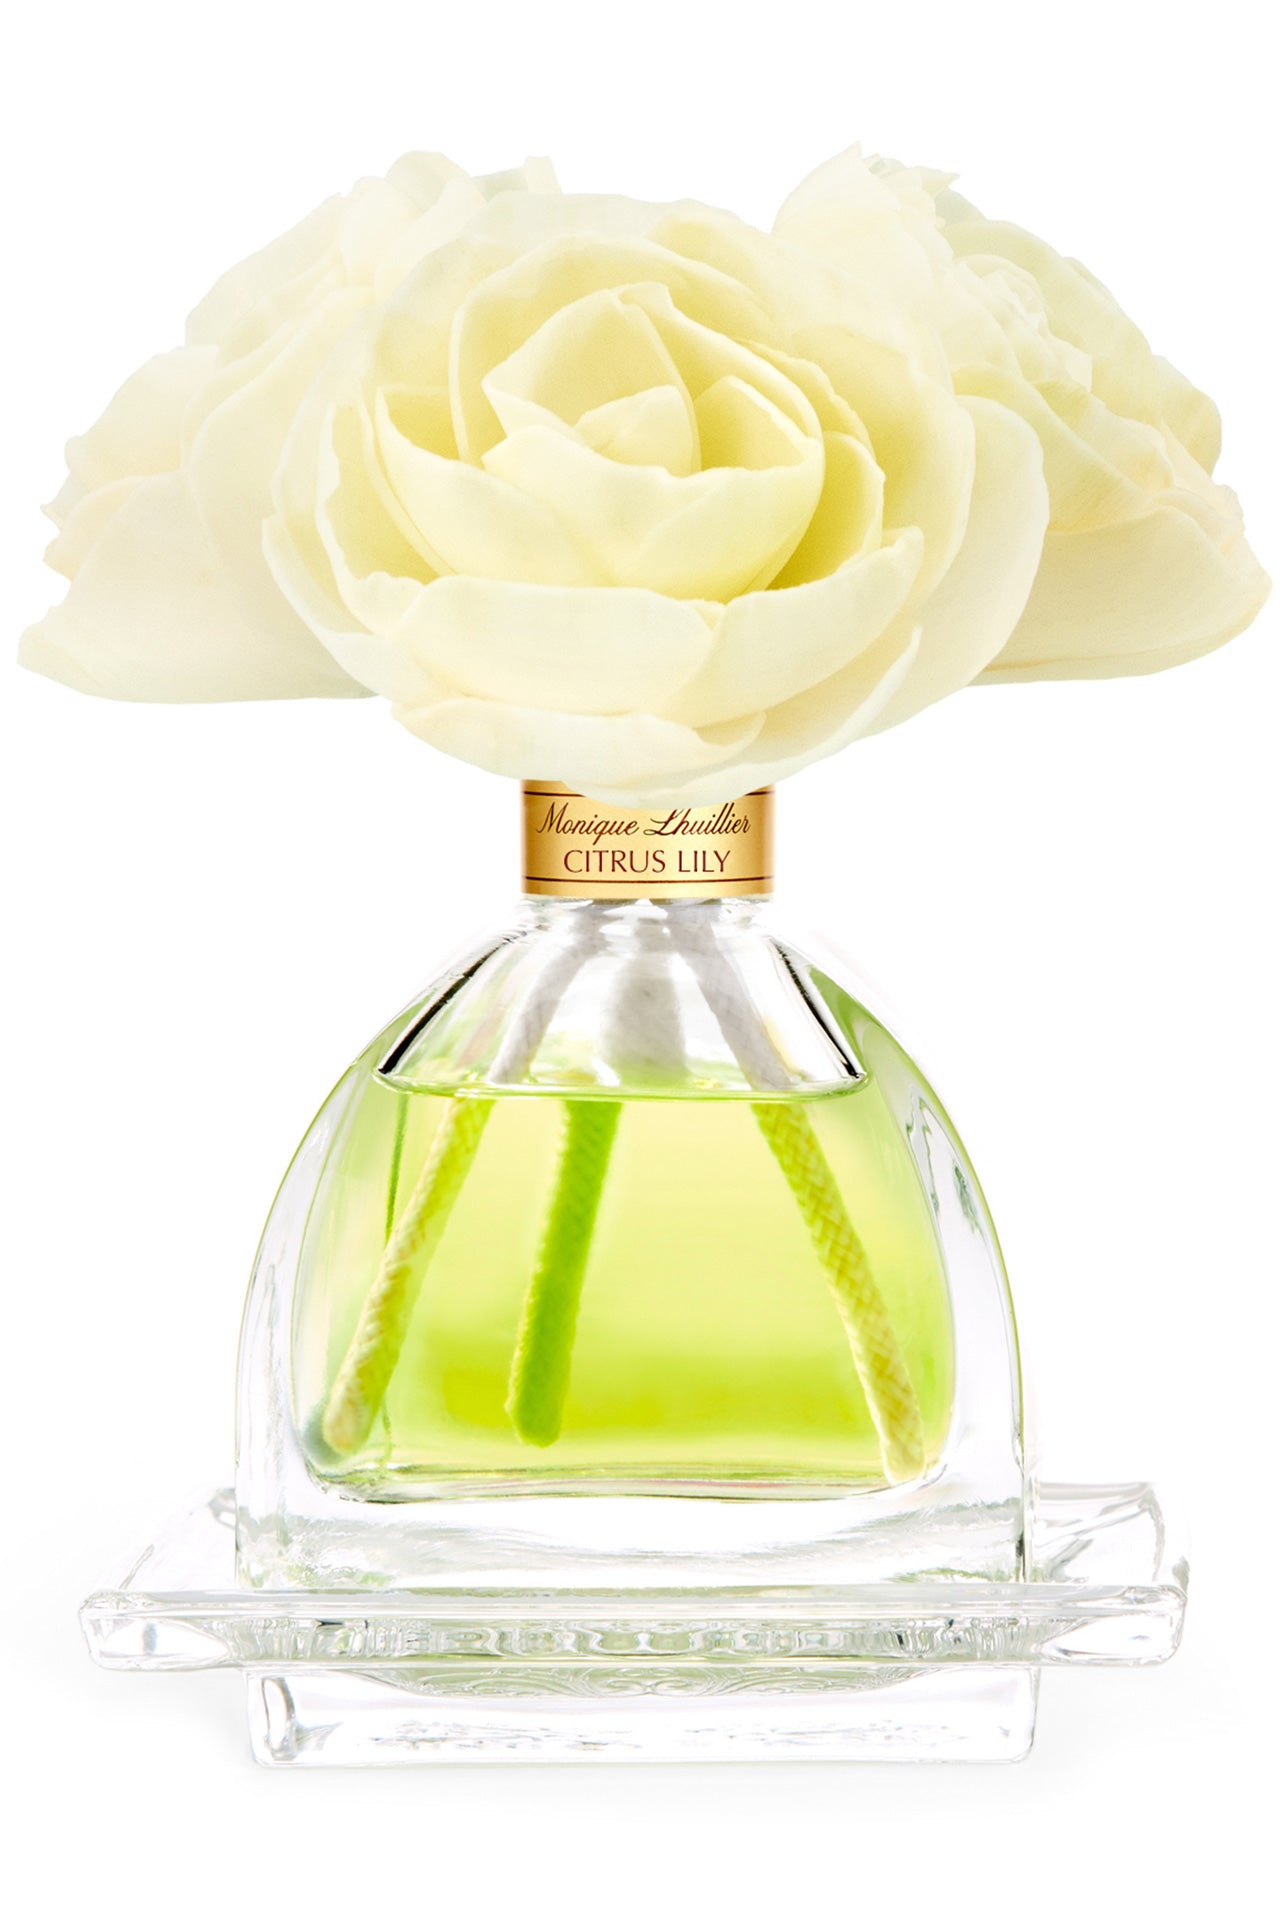 Monique Lhuillier Citrus Lily Diffuser with peony sola flowers.